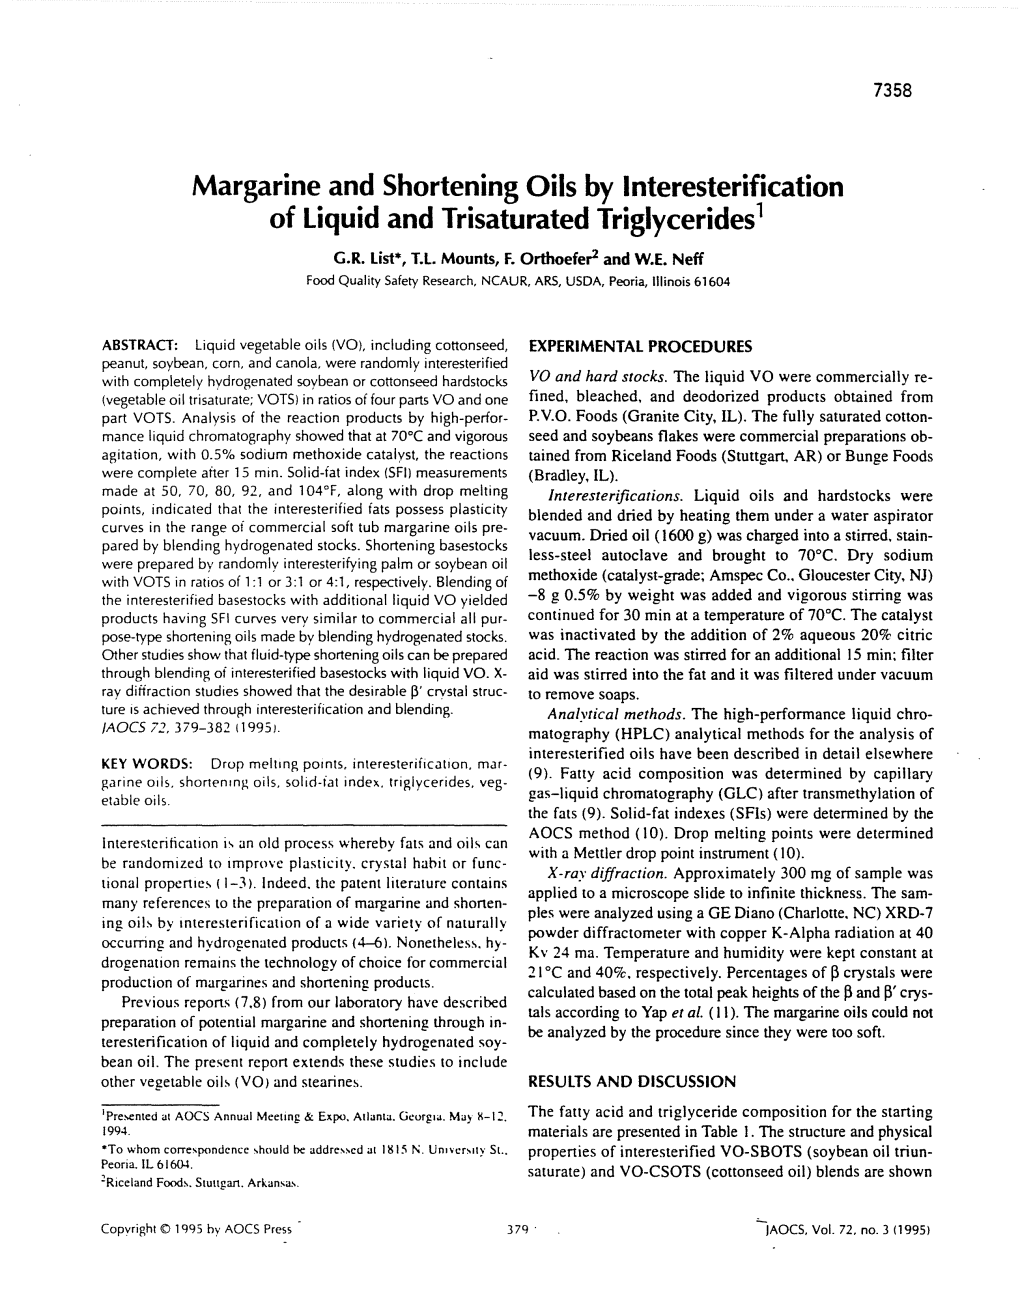 Margarine and Shortening Oils by Interesterification of Liquid and Trisaturated Triglycerides1 G.R